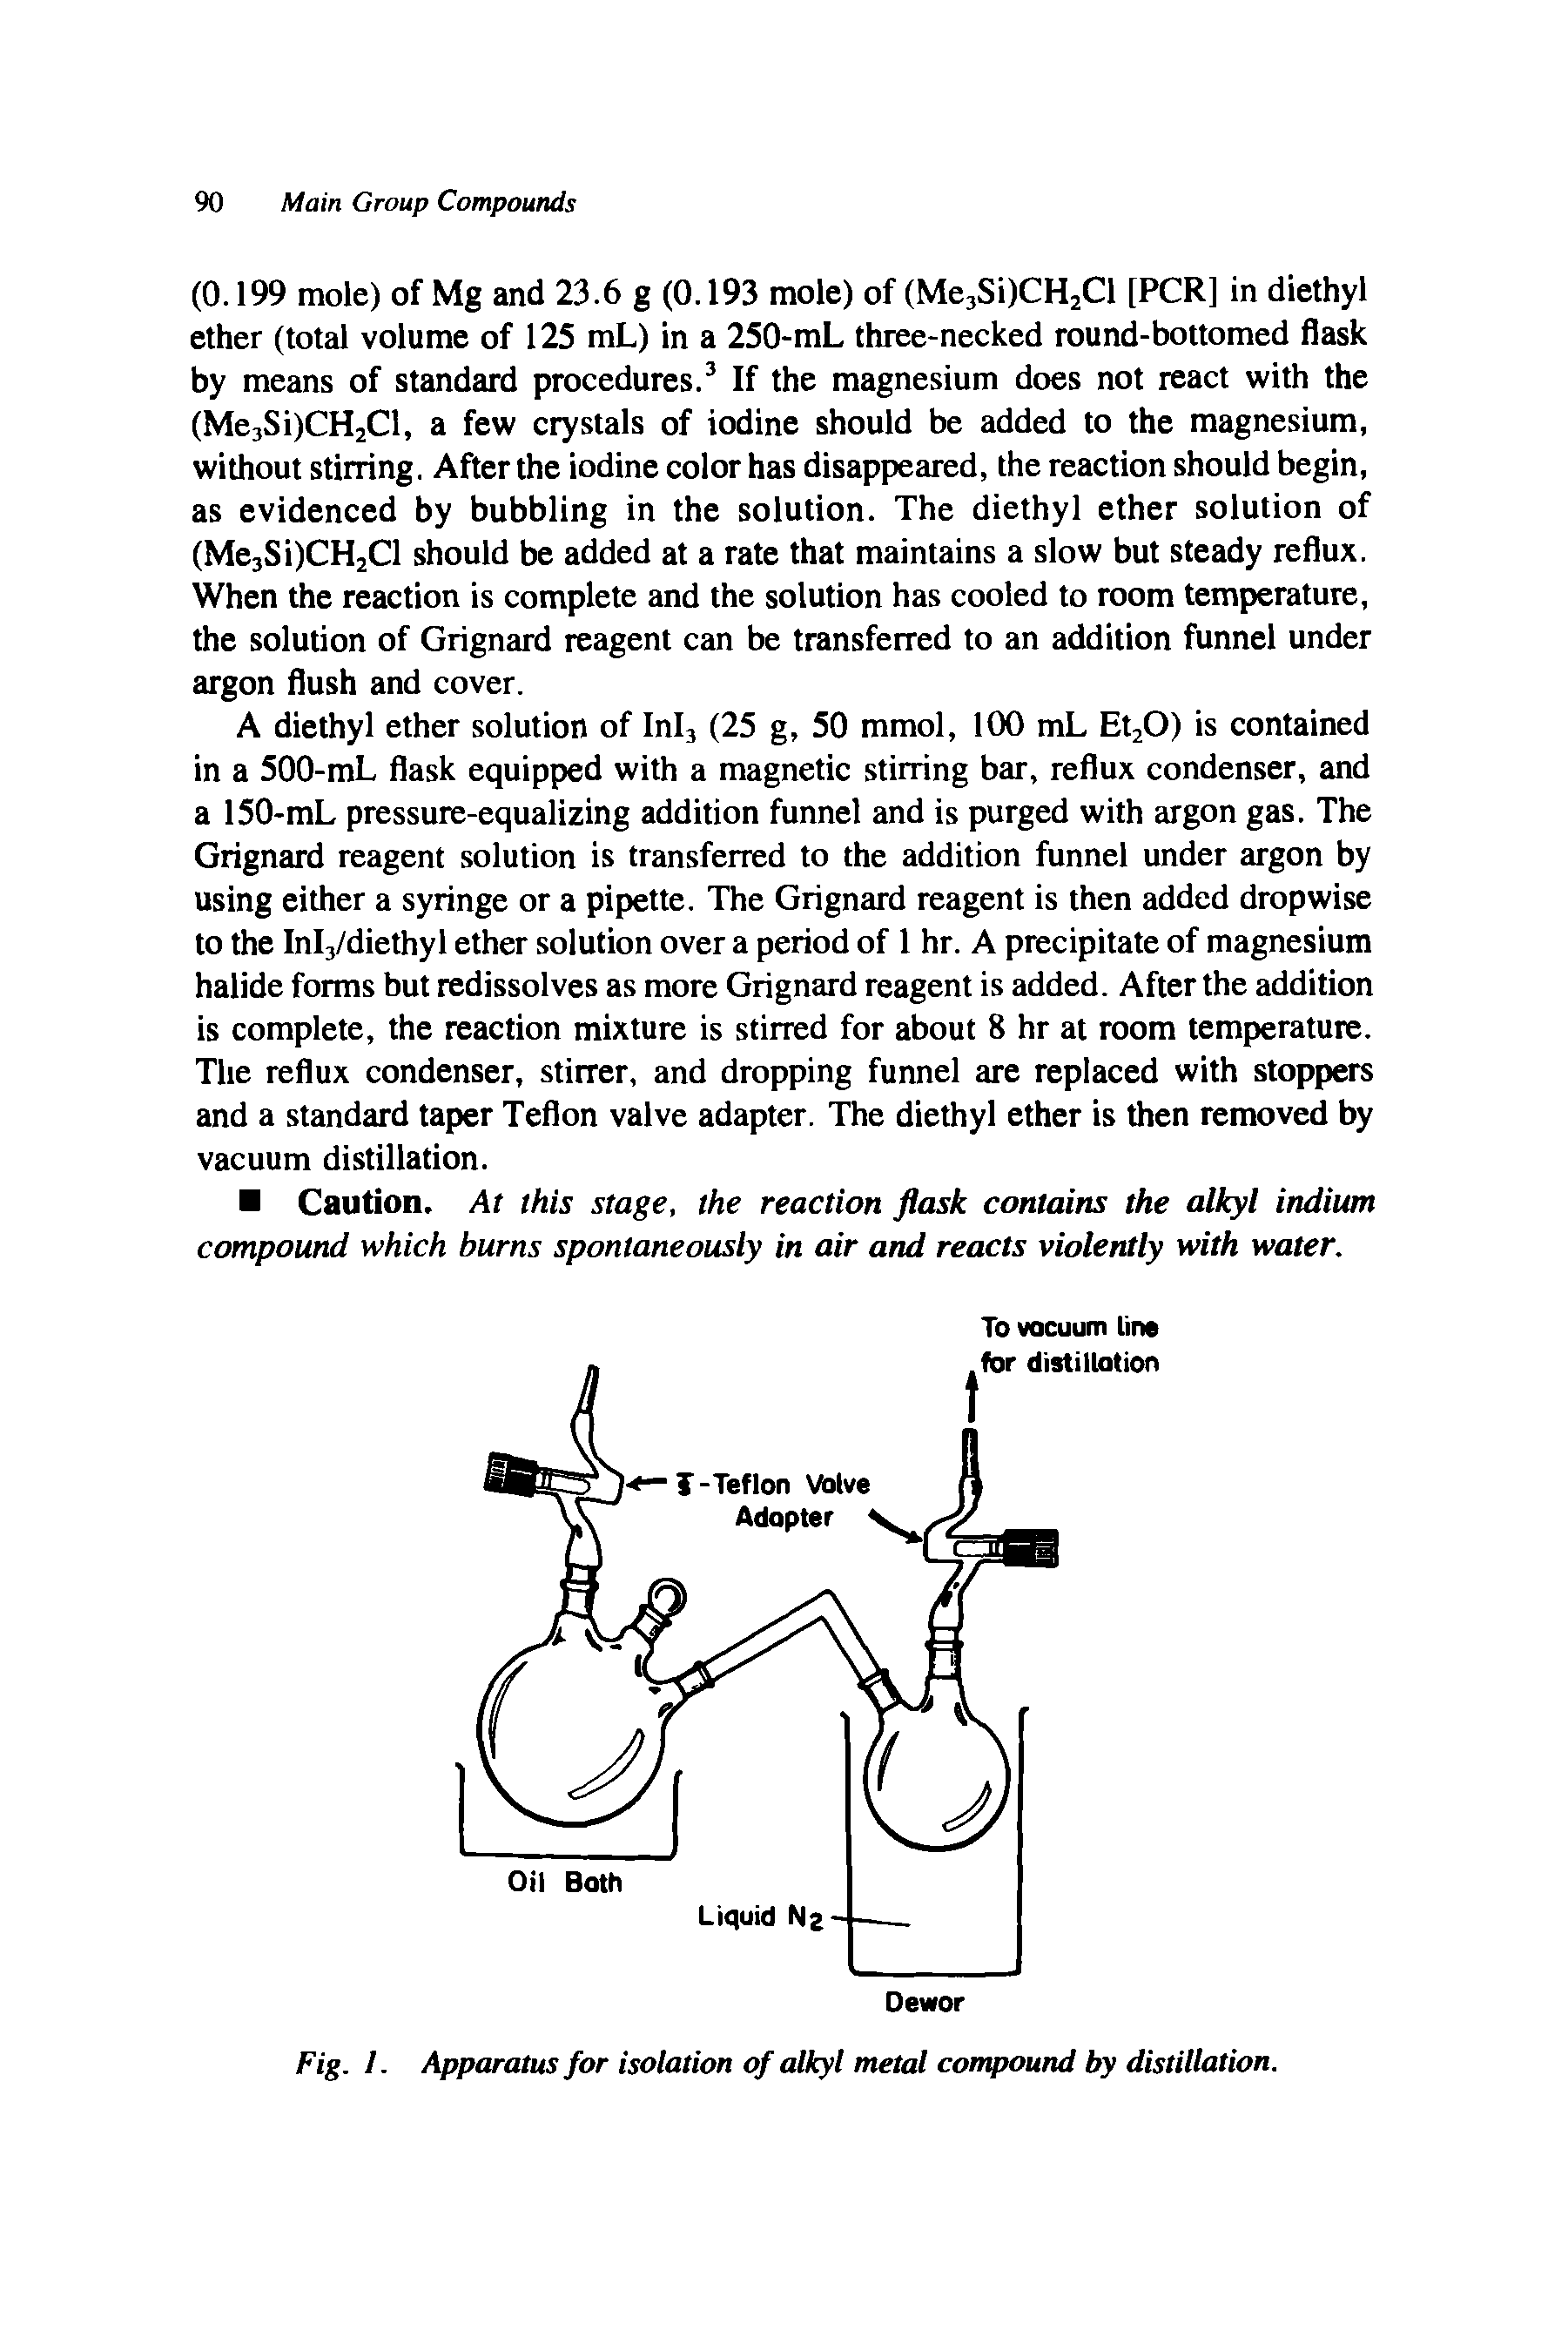 Fig. I. Apparatus for isolation of alkyl metal compound by distillation.